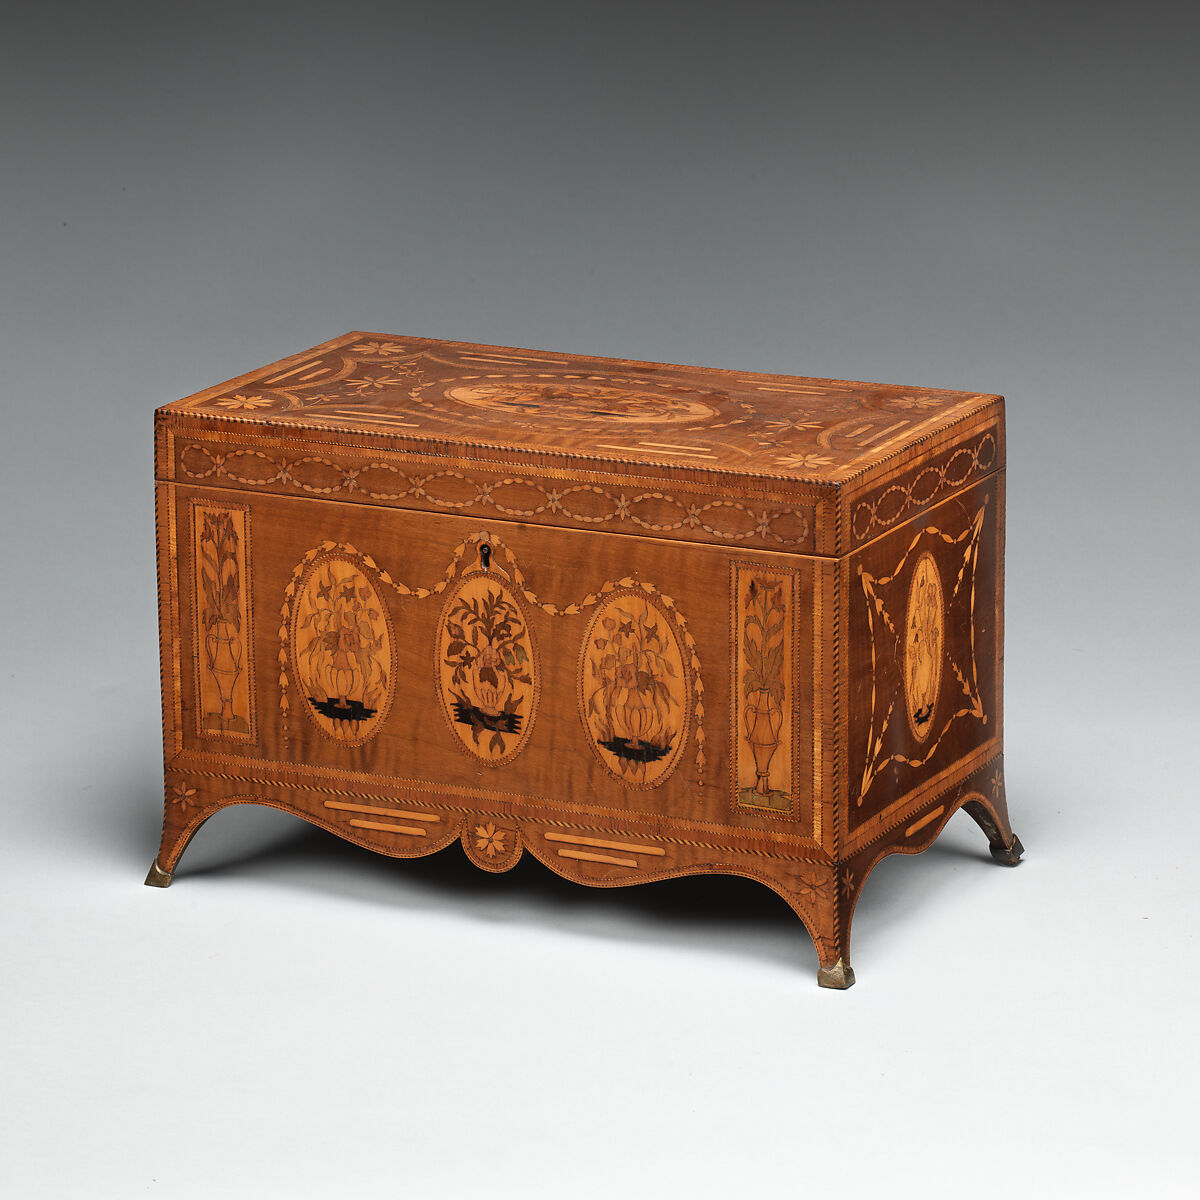 Tea chest with tea caddies, Cedar and oak veneered with maple, harewood, tulipwood, kingwood, satinwood, amaranth, holly, and stained holly; foil lining, British 